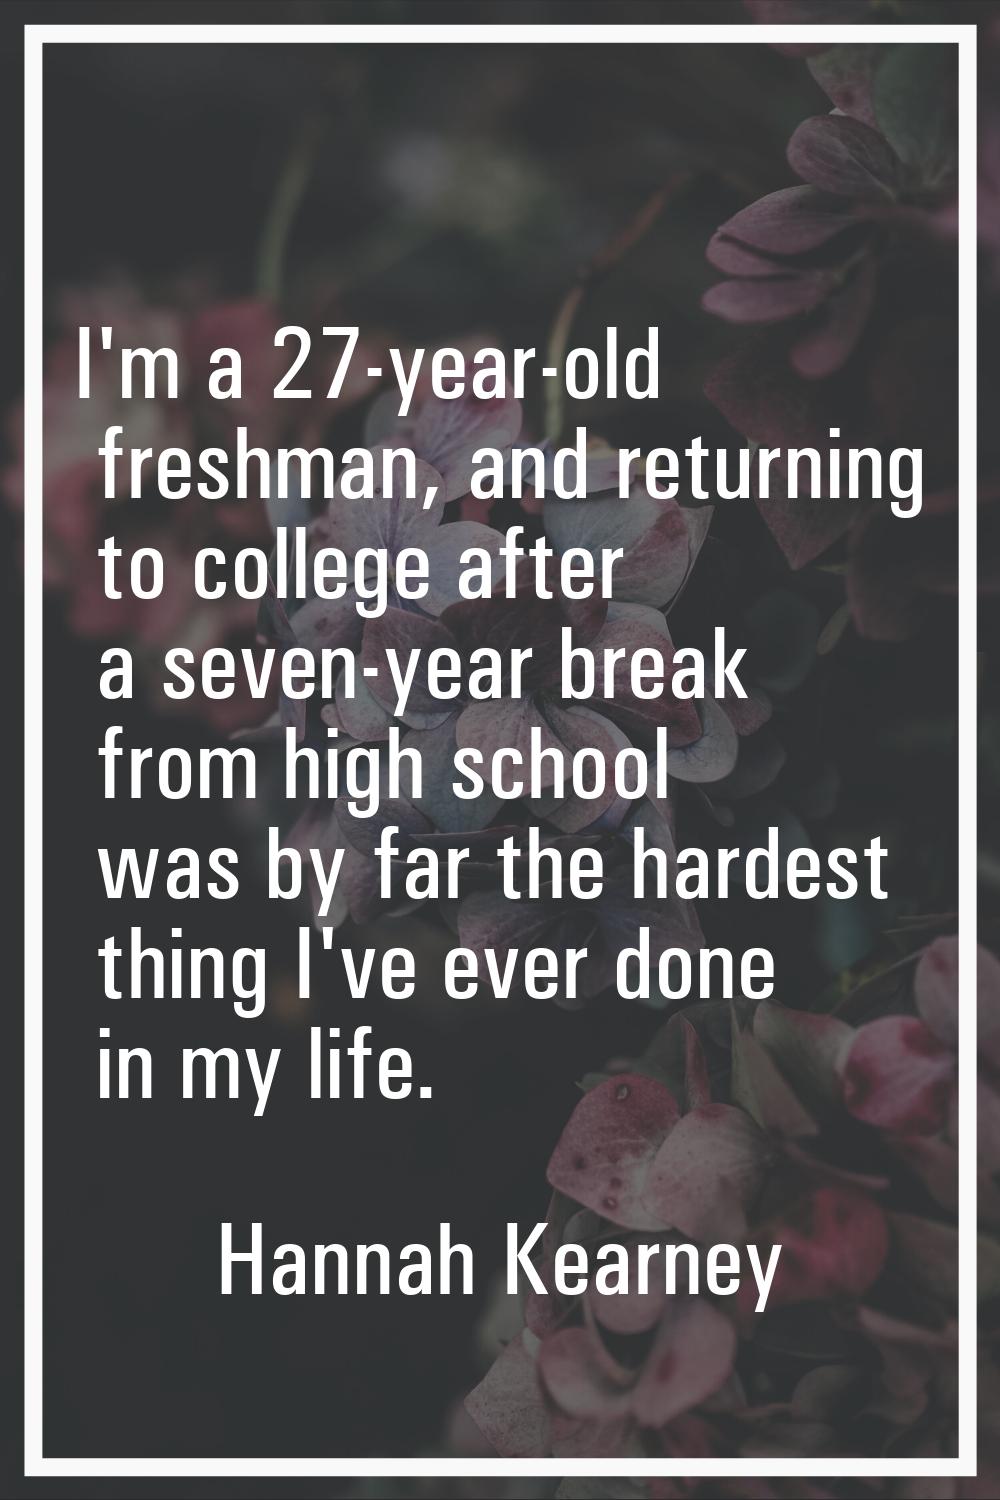 I'm a 27-year-old freshman, and returning to college after a seven-year break from high school was 